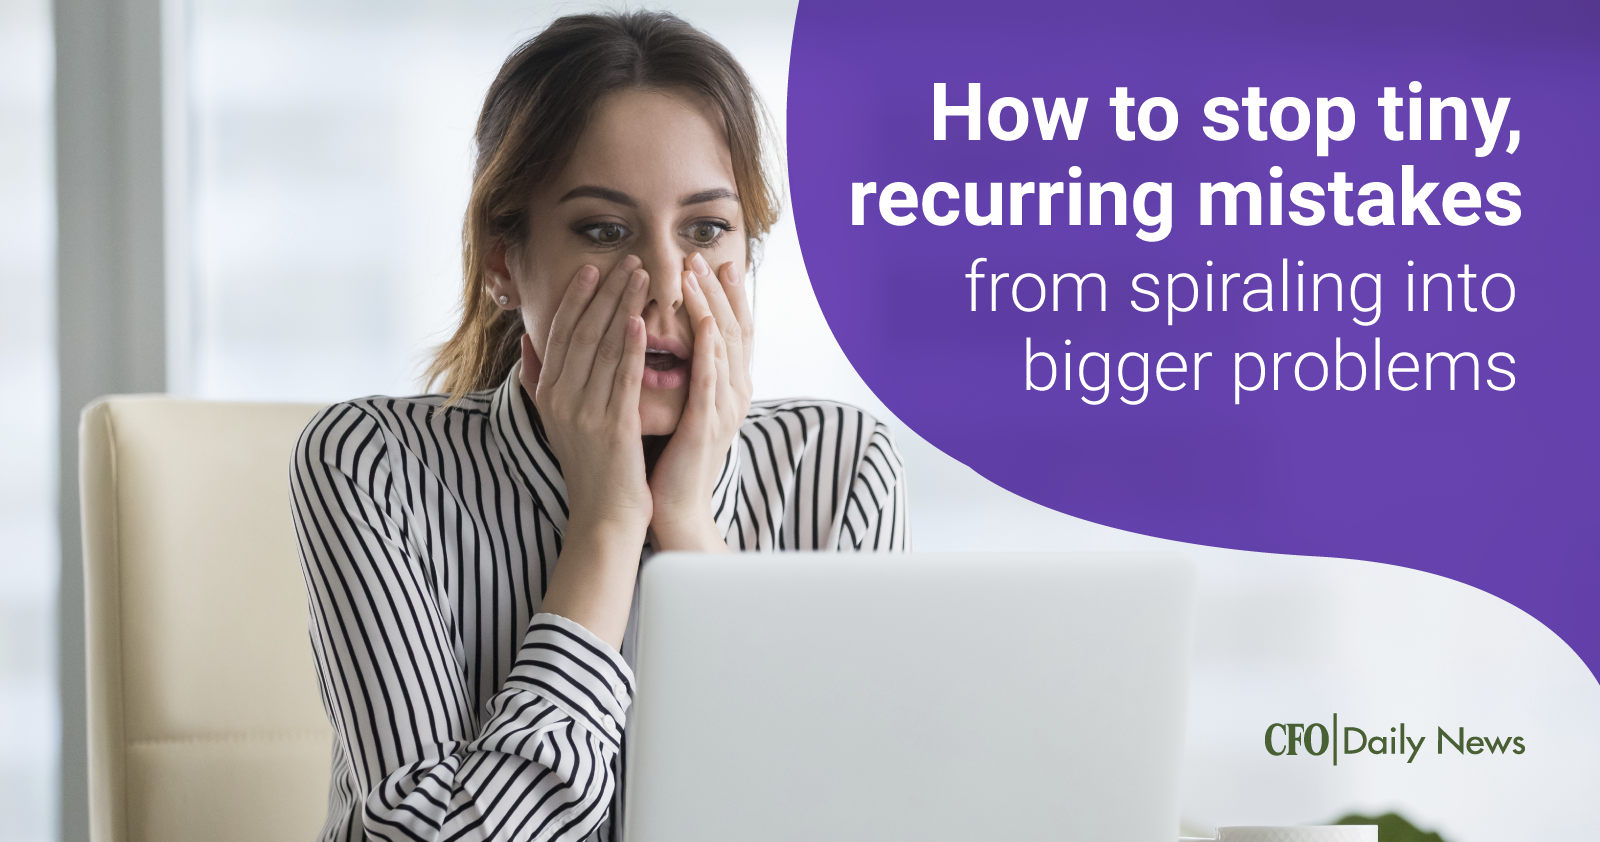 How to stop tiny, recurring mistakes from spiraling into bigger problems